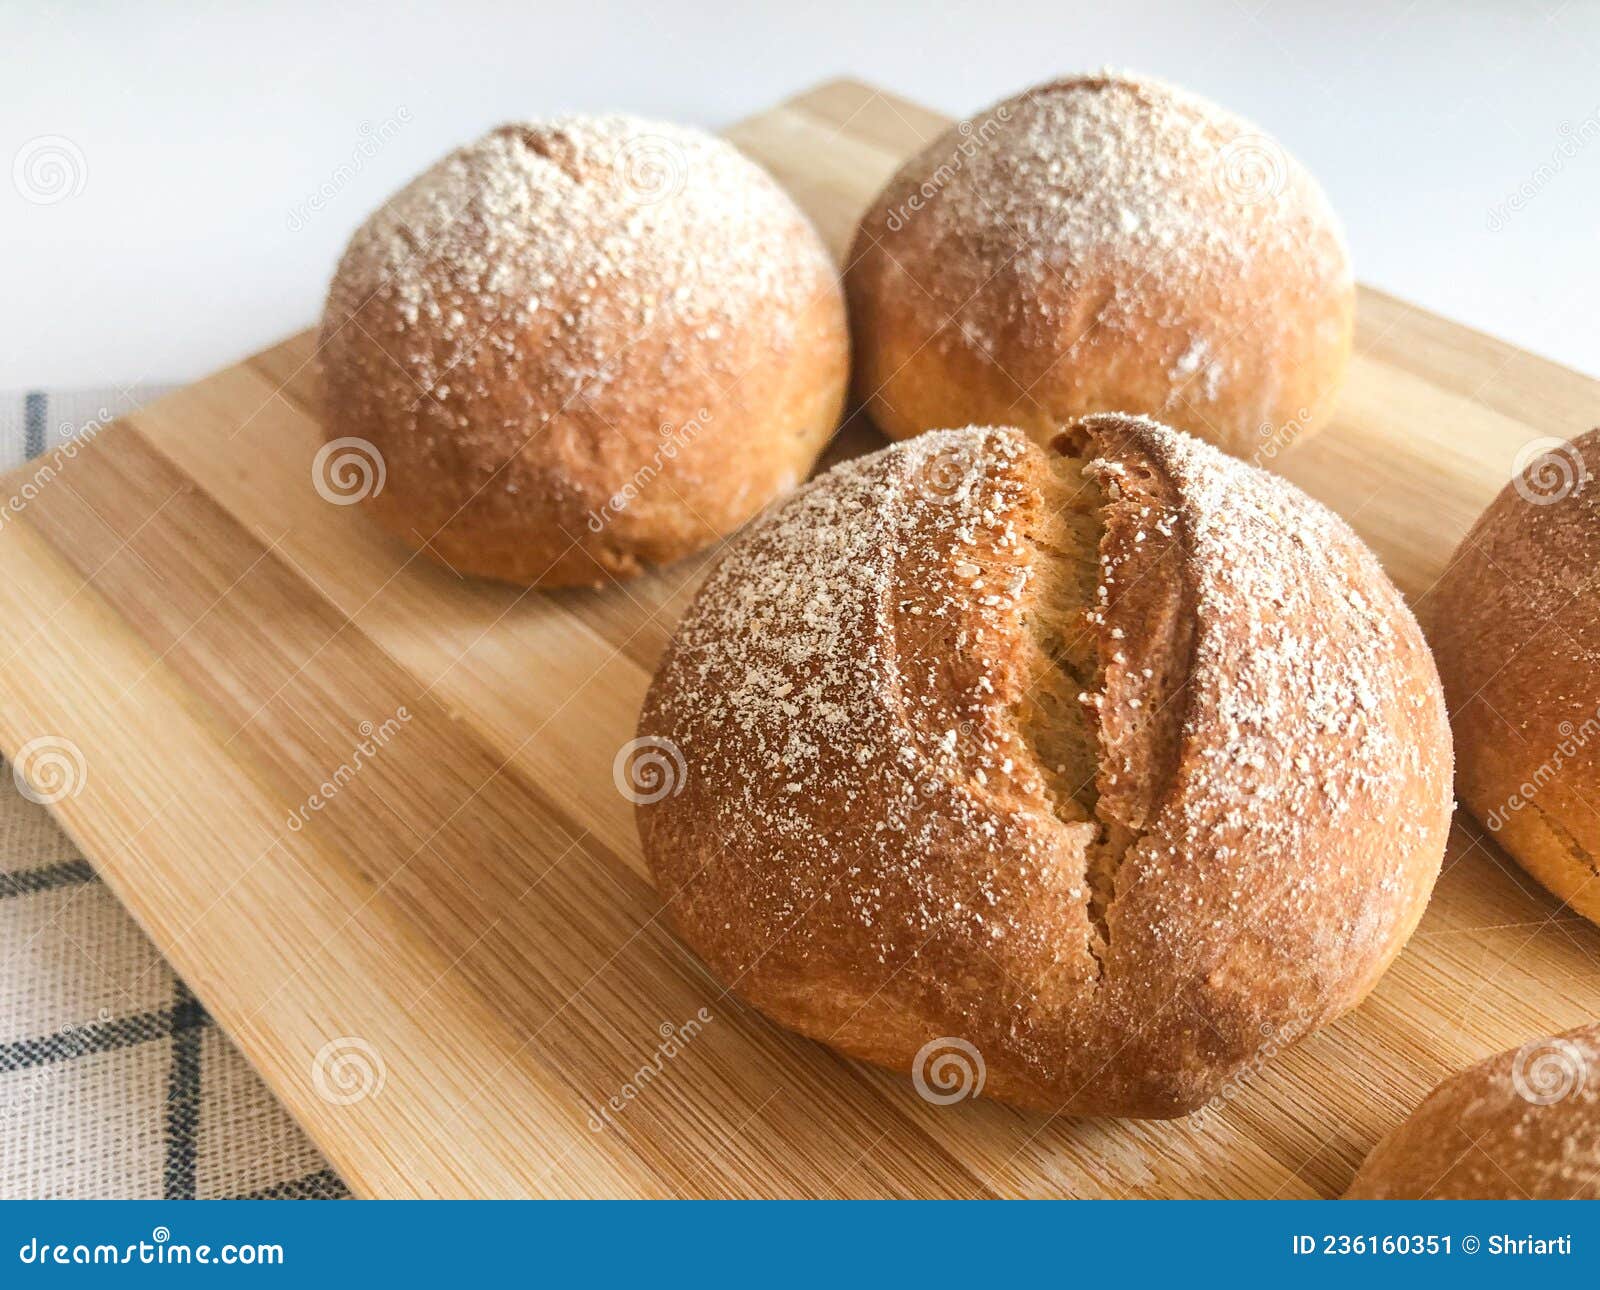 https://thumbs.dreamstime.com/z/french-wheat-buns-petit-pain-served-plate-wooden-cutting-board-close-up-traditional-mini-bun-little-breakfast-236160351.jpg